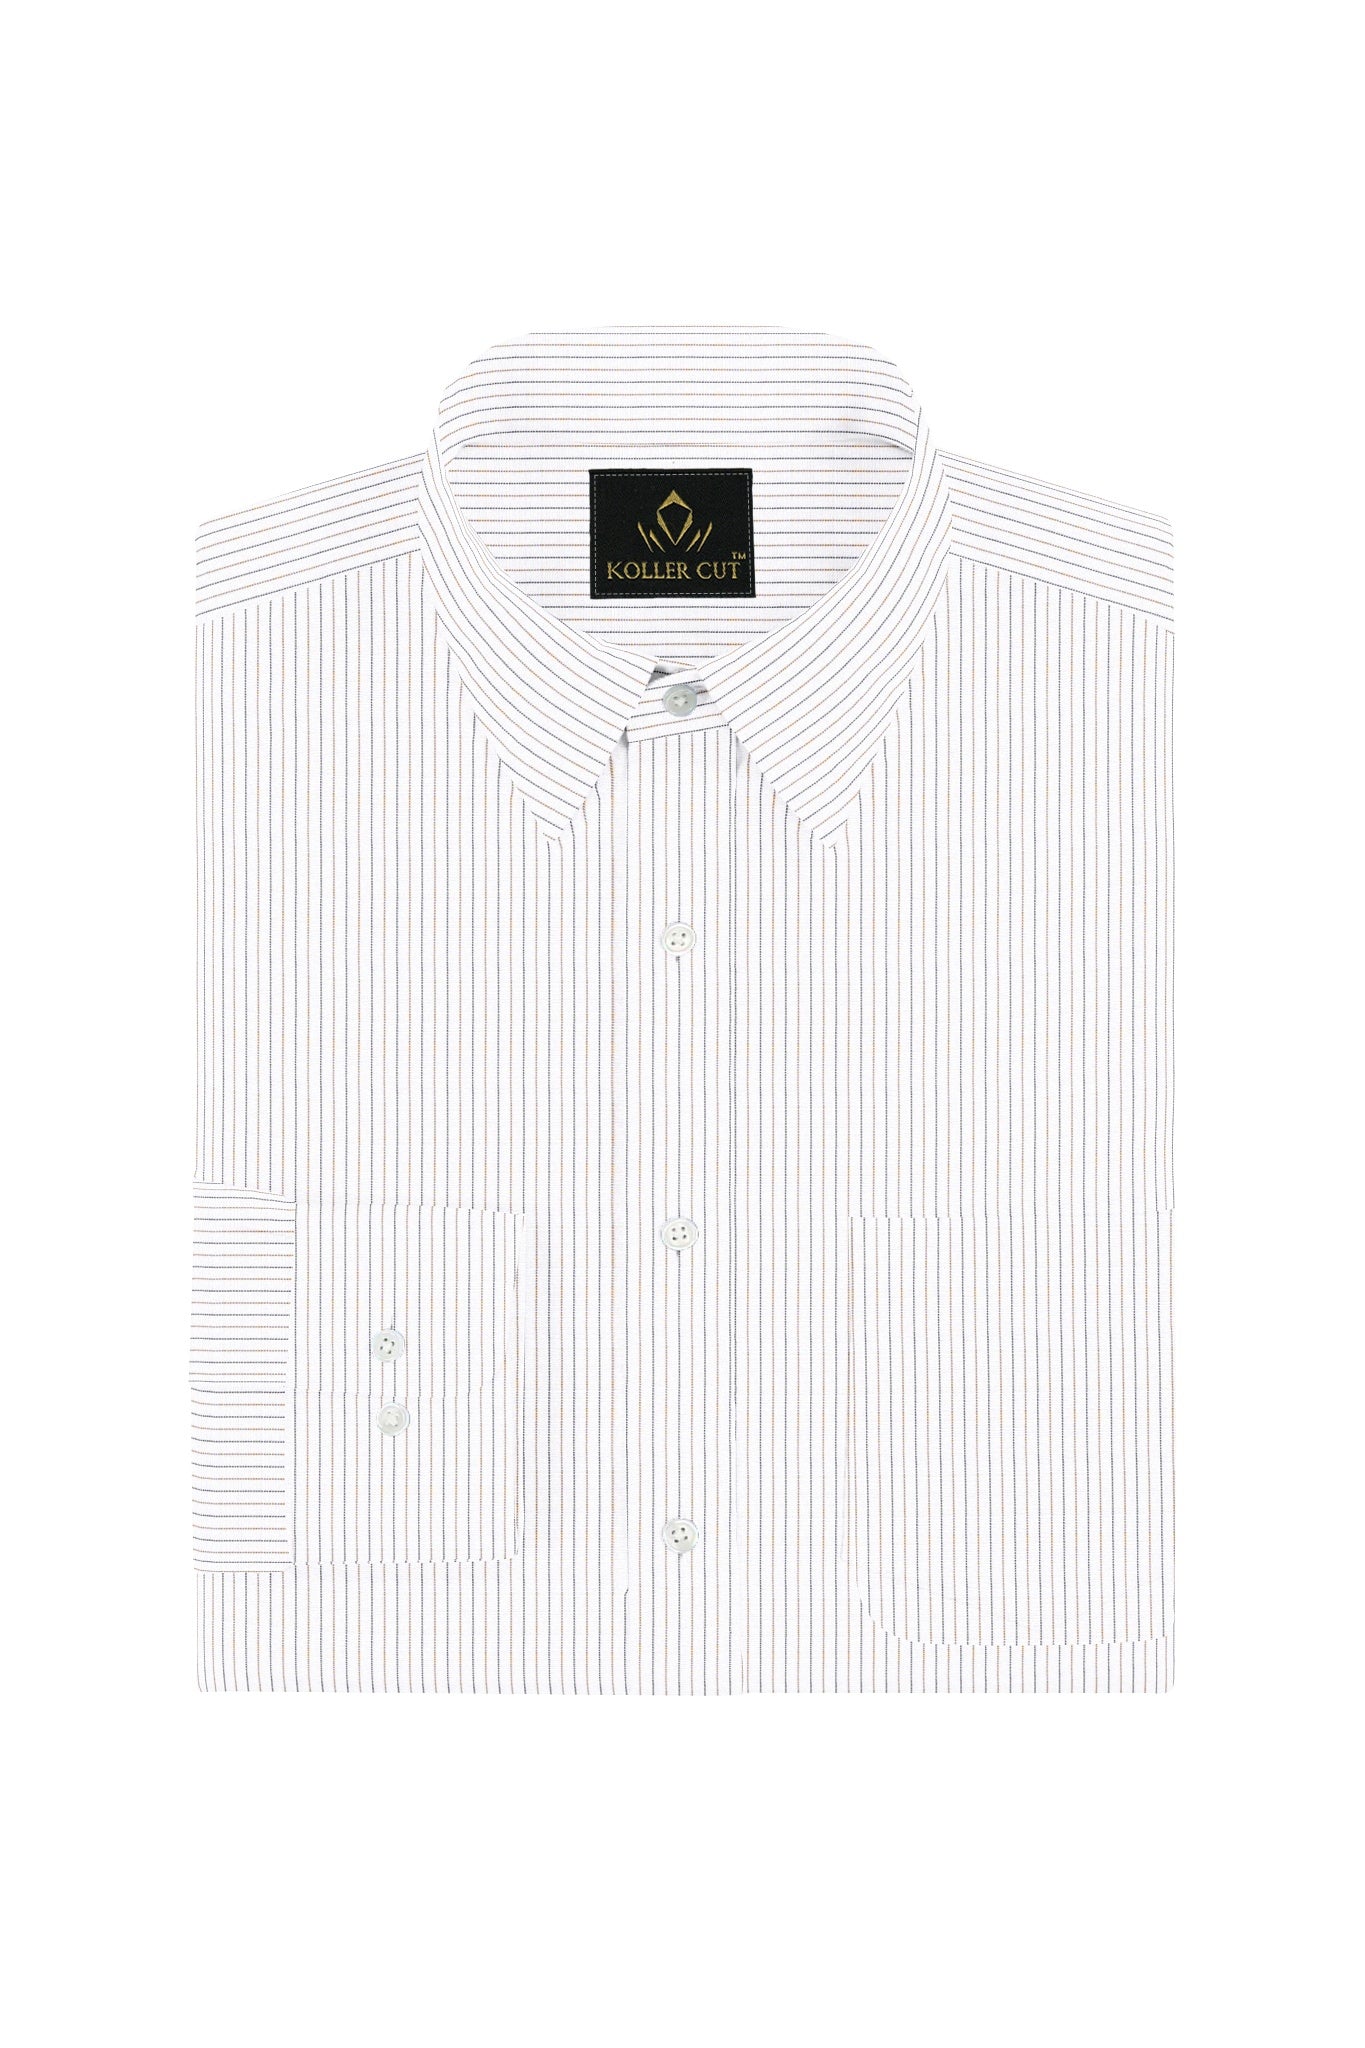 White with Hortensia Purple and Nectar Peach Pinstripes Superior Cotton Shirt